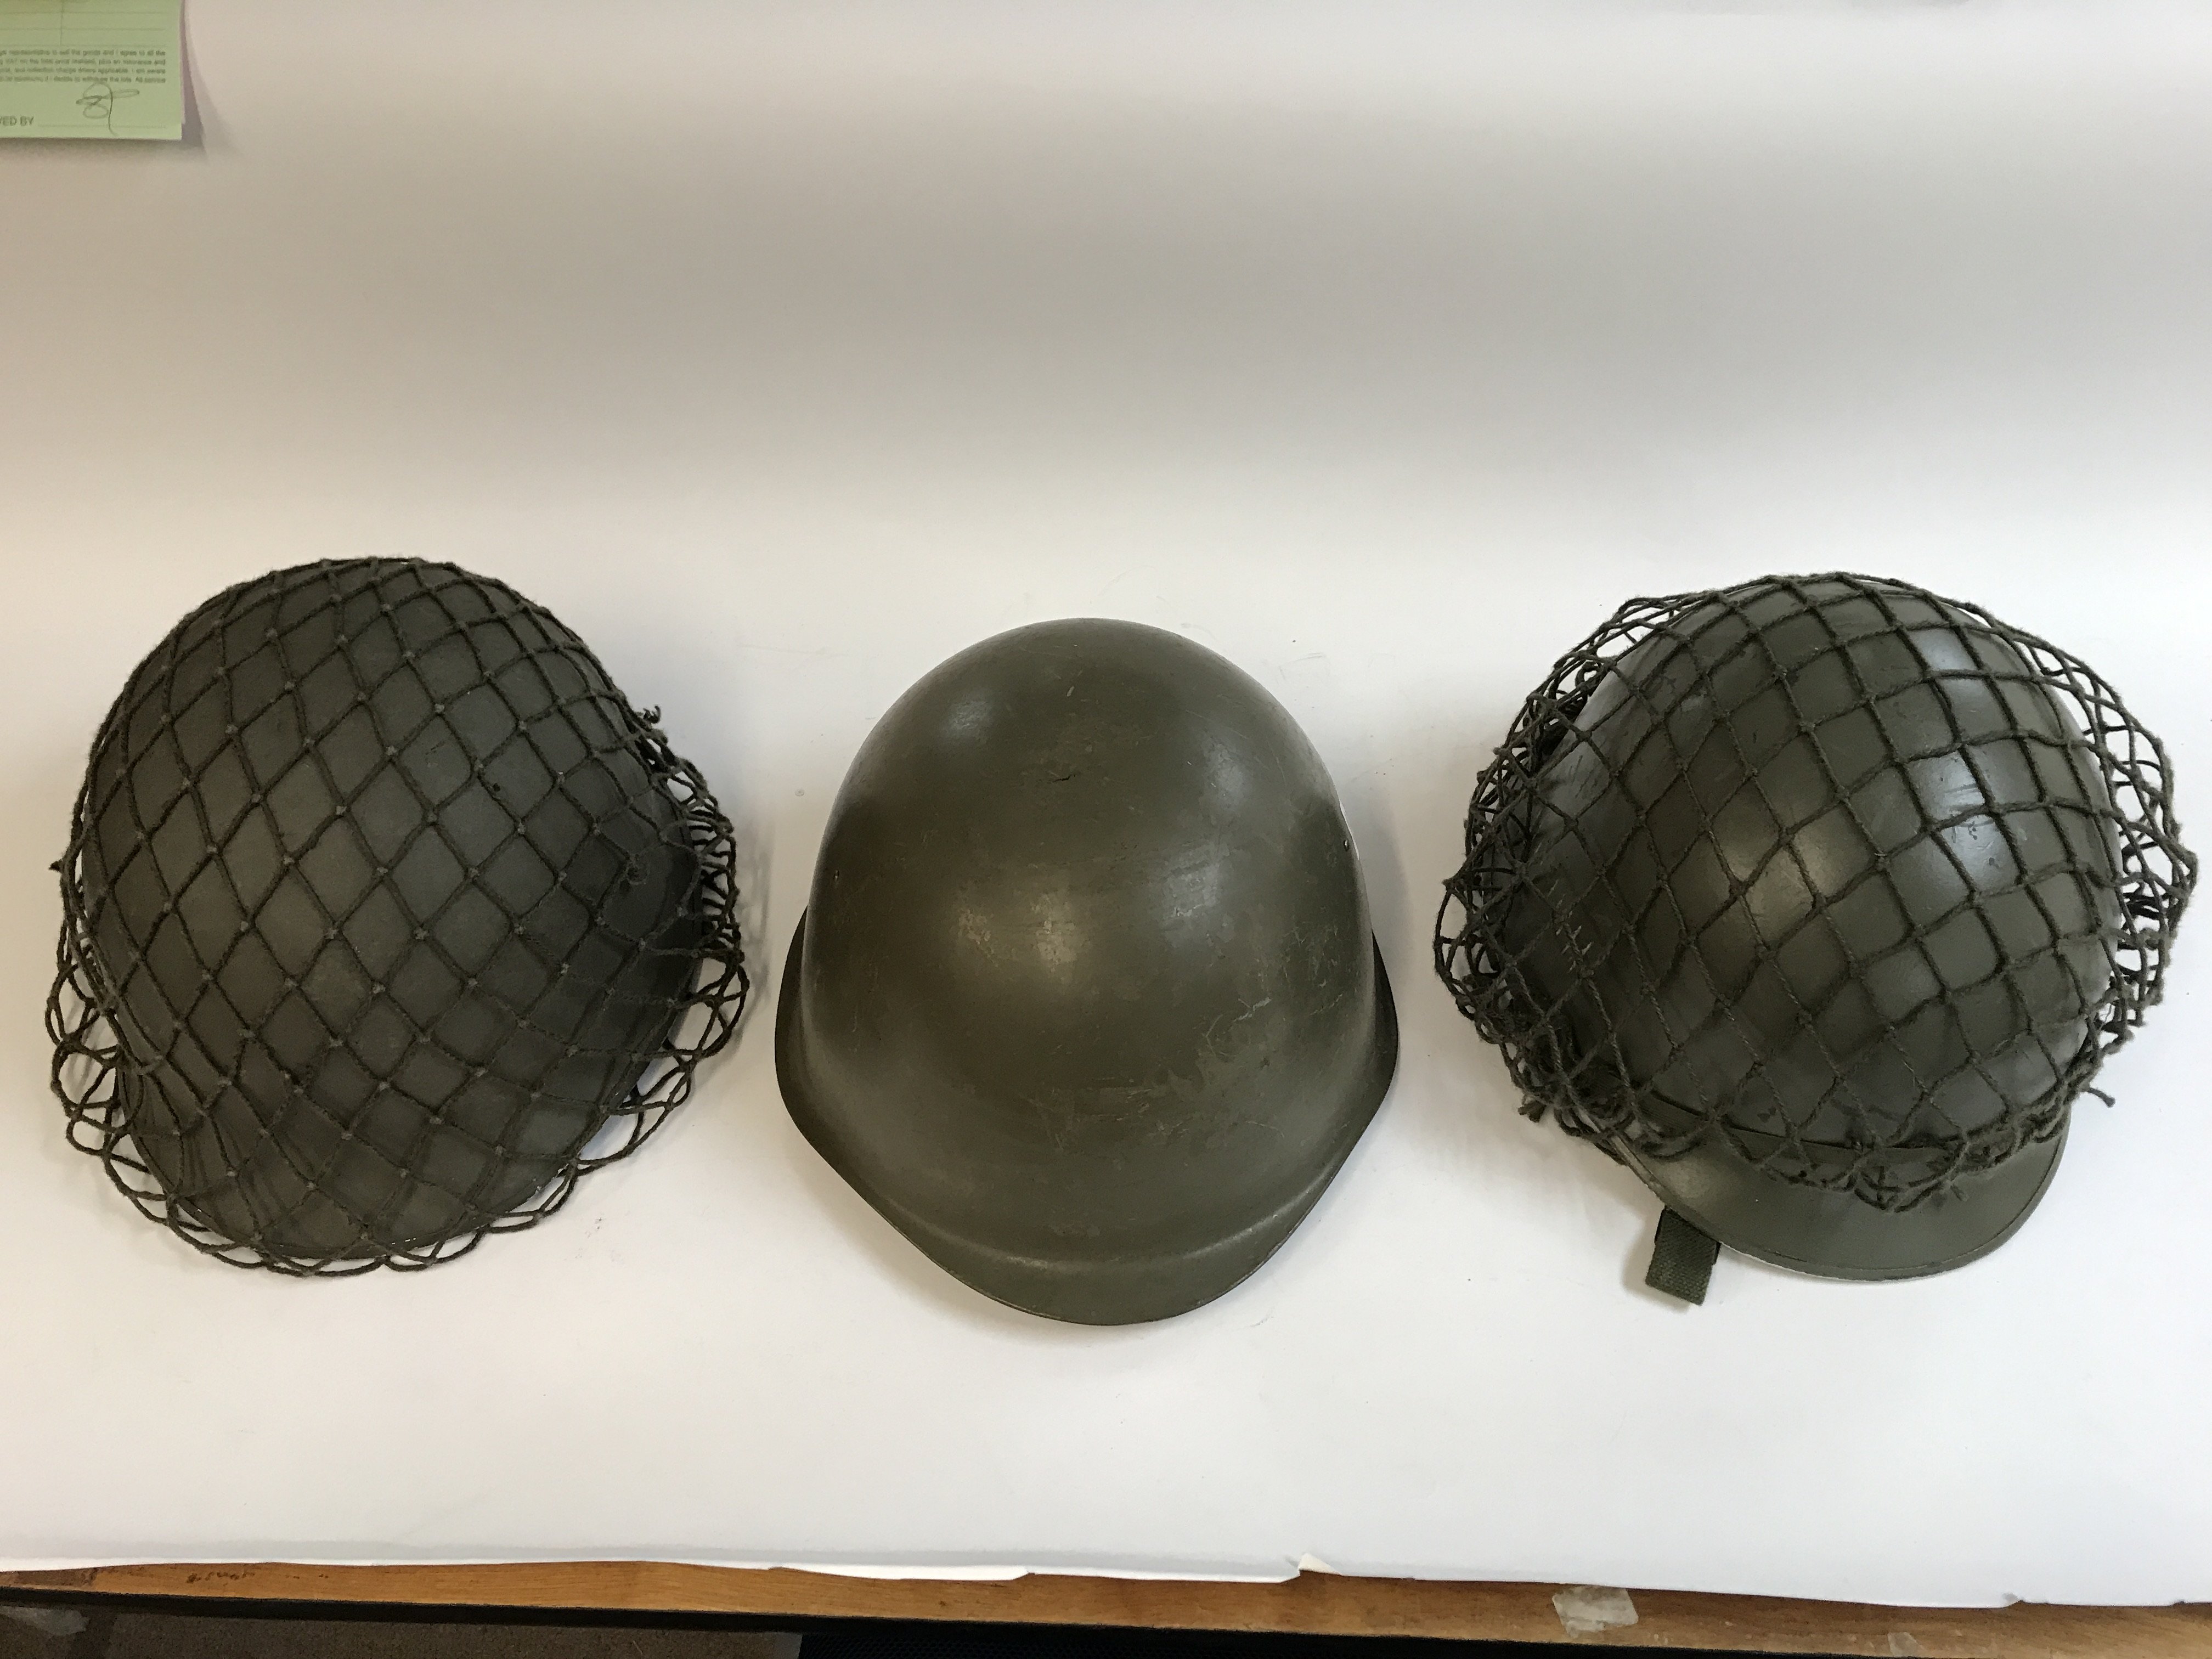 Three American military helmets with two bags a vi